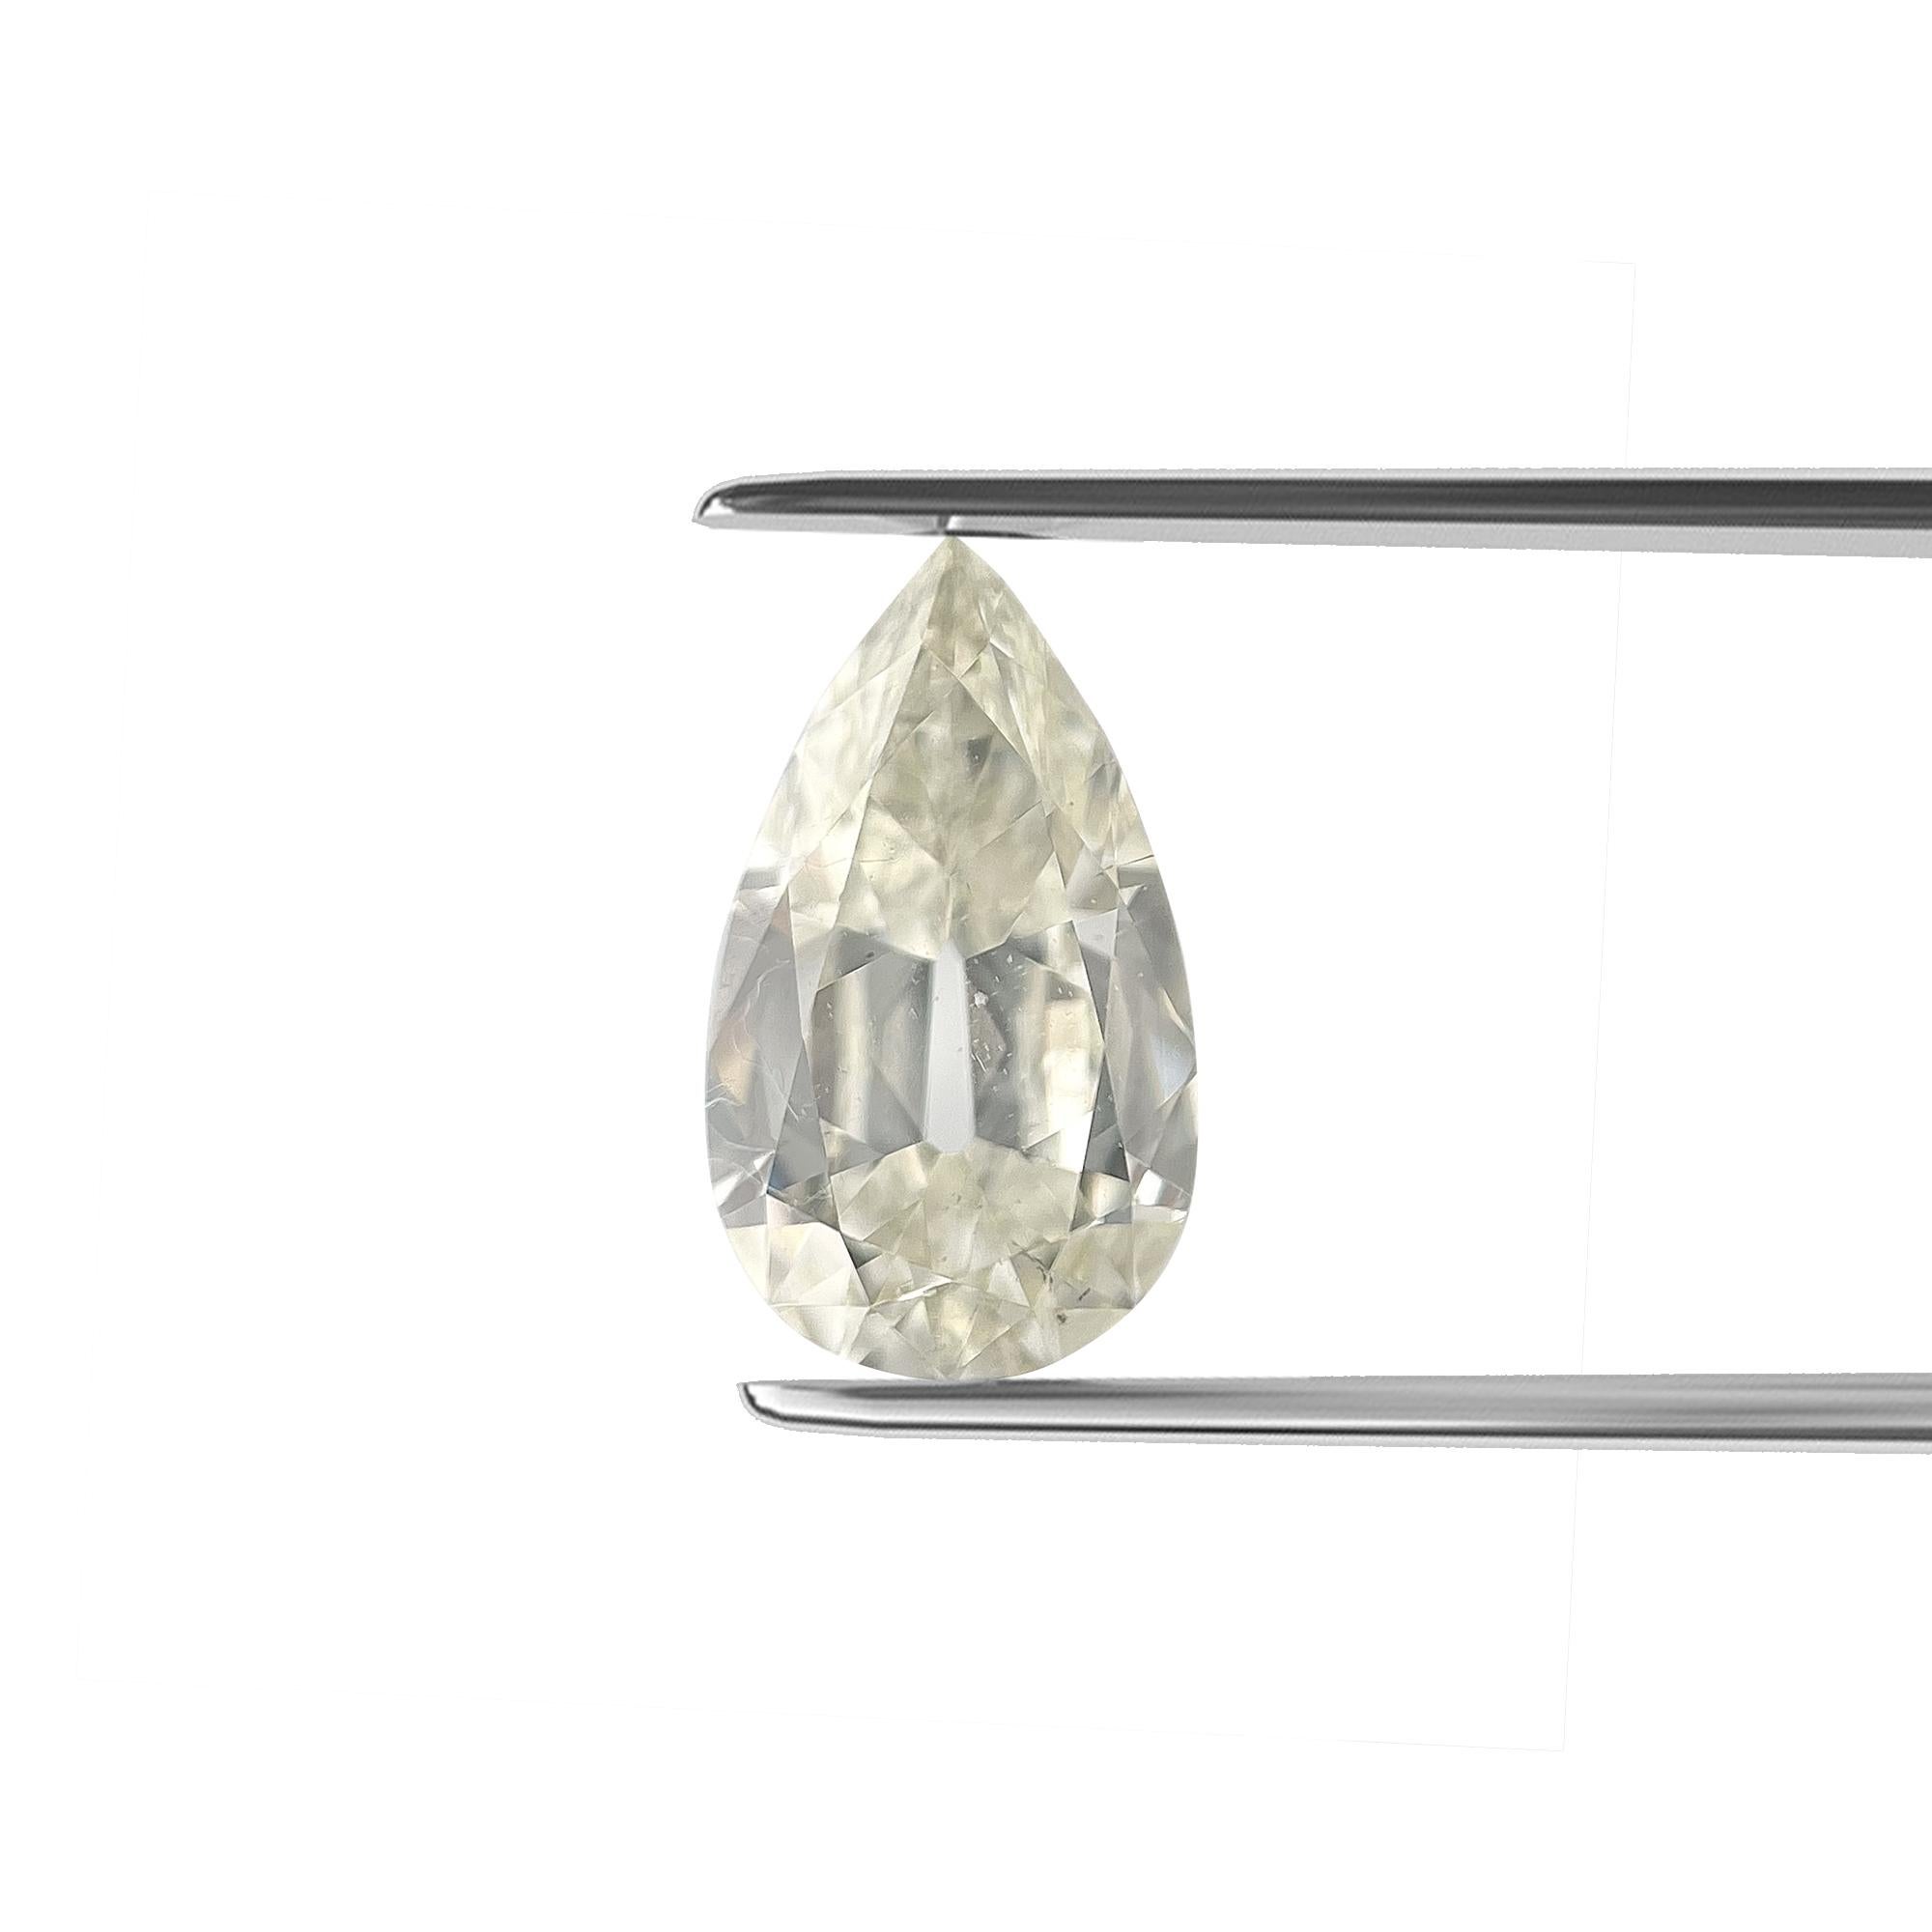 ITEM DESCRIPTION

ID #: 56916
Stone Shape: Pear Shape
Diamond Weight: 1.06 CT
Clarity: VS2
Color: K
Measurements: 9.16 x 5.25 x 3.00 mm
Our Price: $3910.00
Appraisal Price: $5865.00


These genuine diamonds are graded approximate by our in house